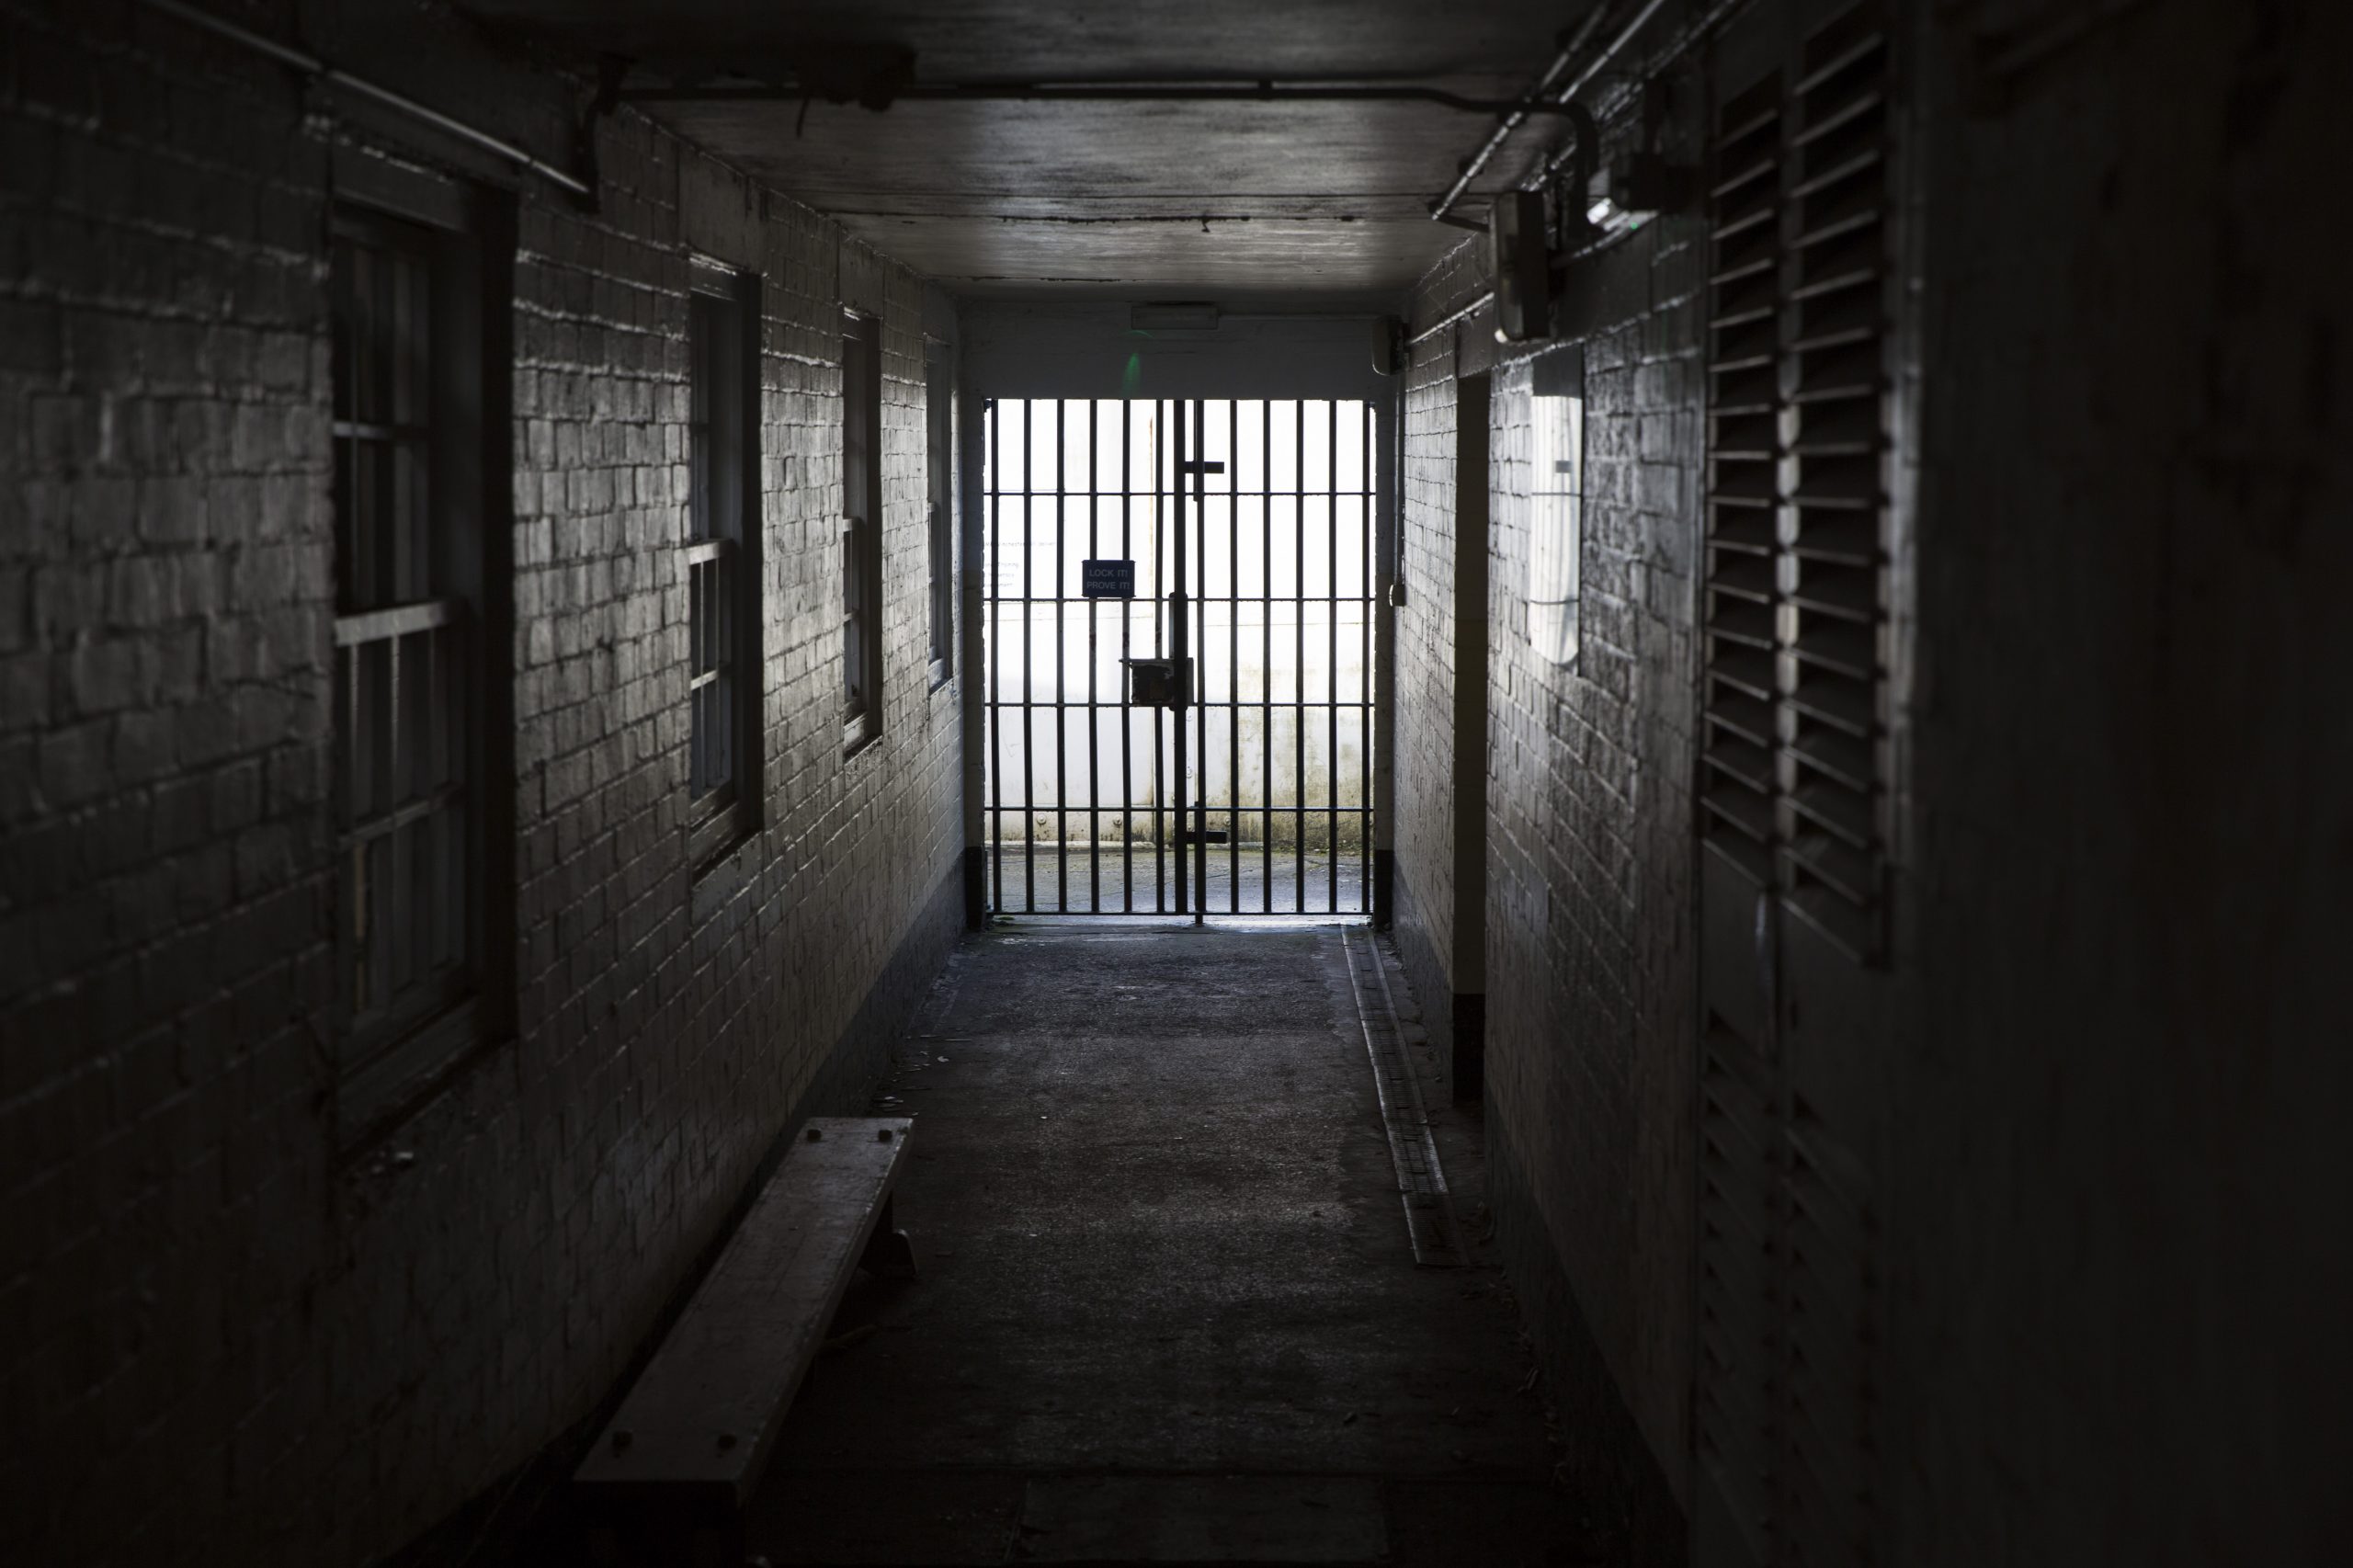 Prison deaths on track to hit highest level in last 10 years